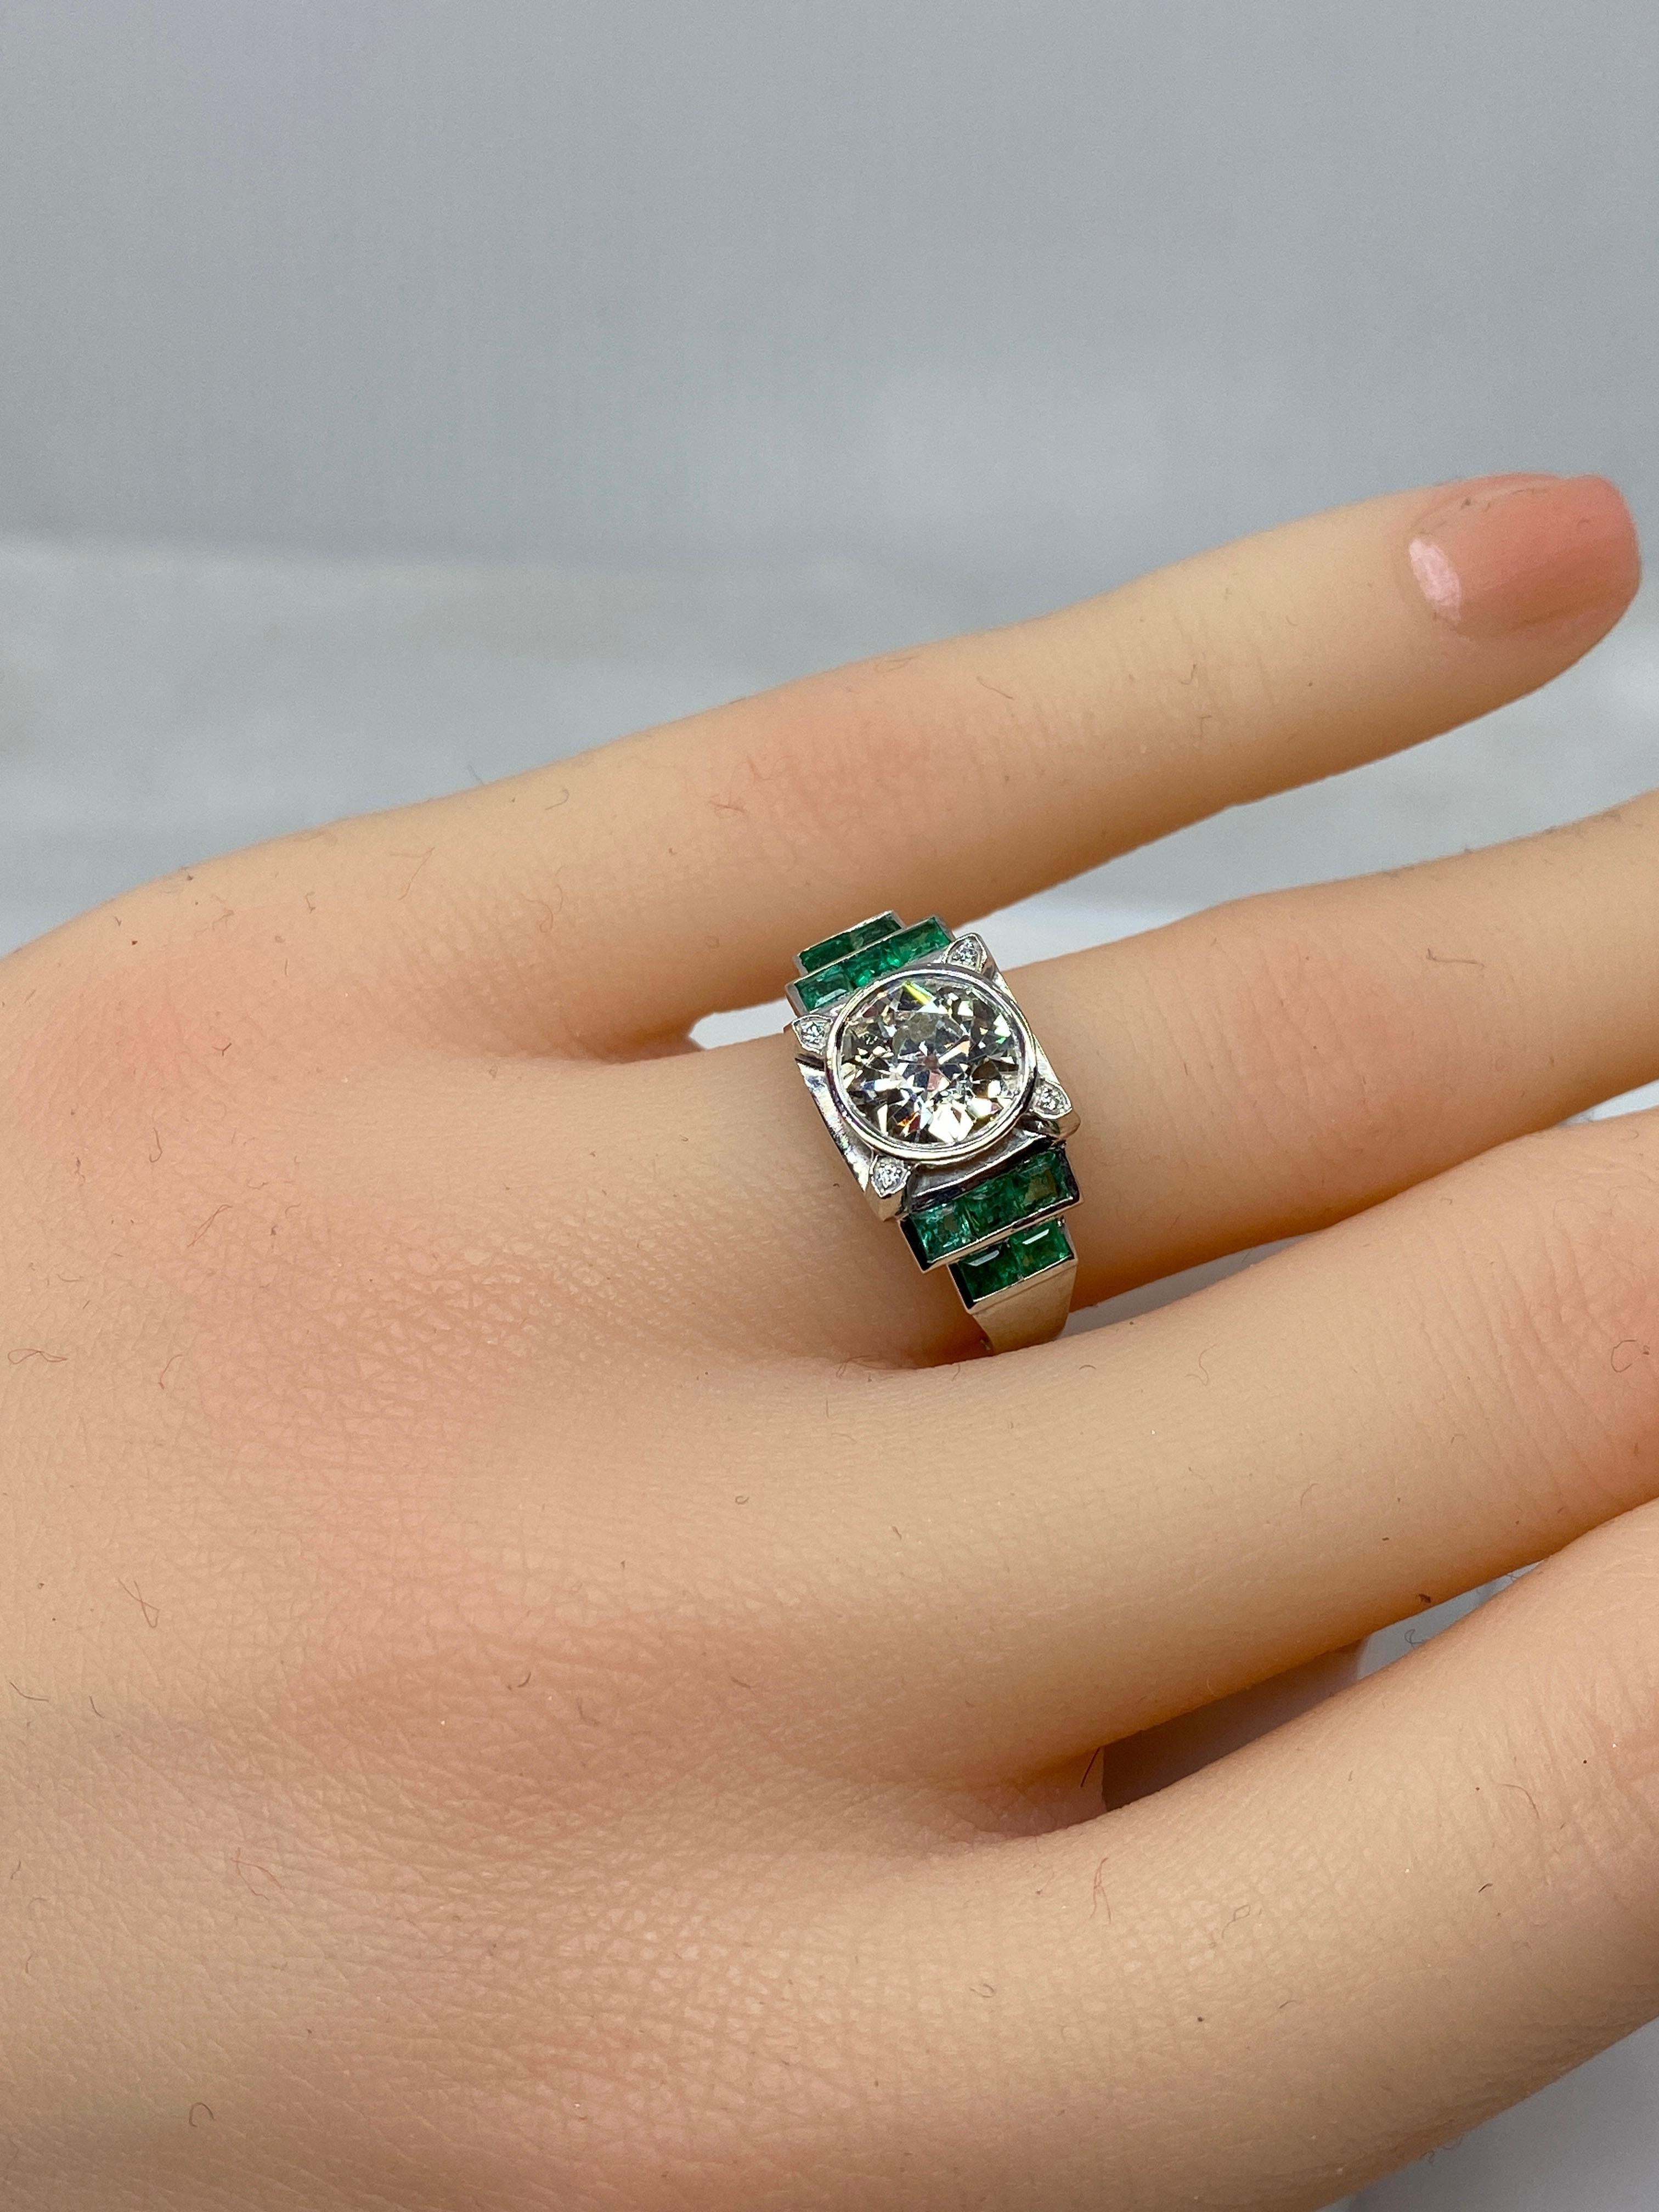 Platinium Engagement Ring Set with a 1.55 Carat Diamond Backed by Emeralds, 1900 For Sale 7